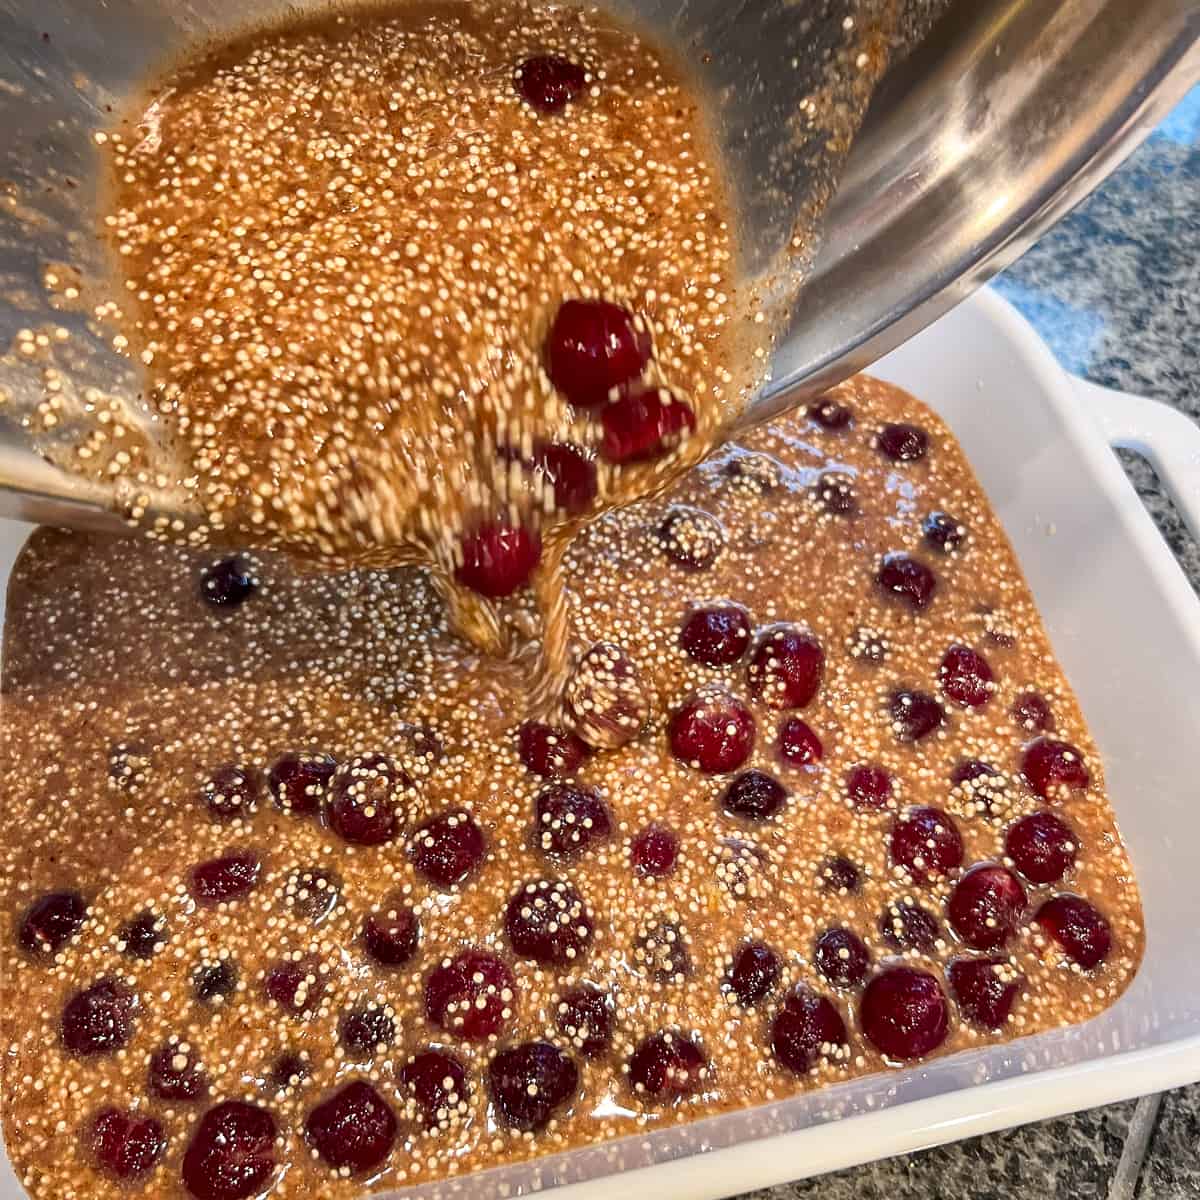 The cherry quinoa mixture being poured into a casserole dish.